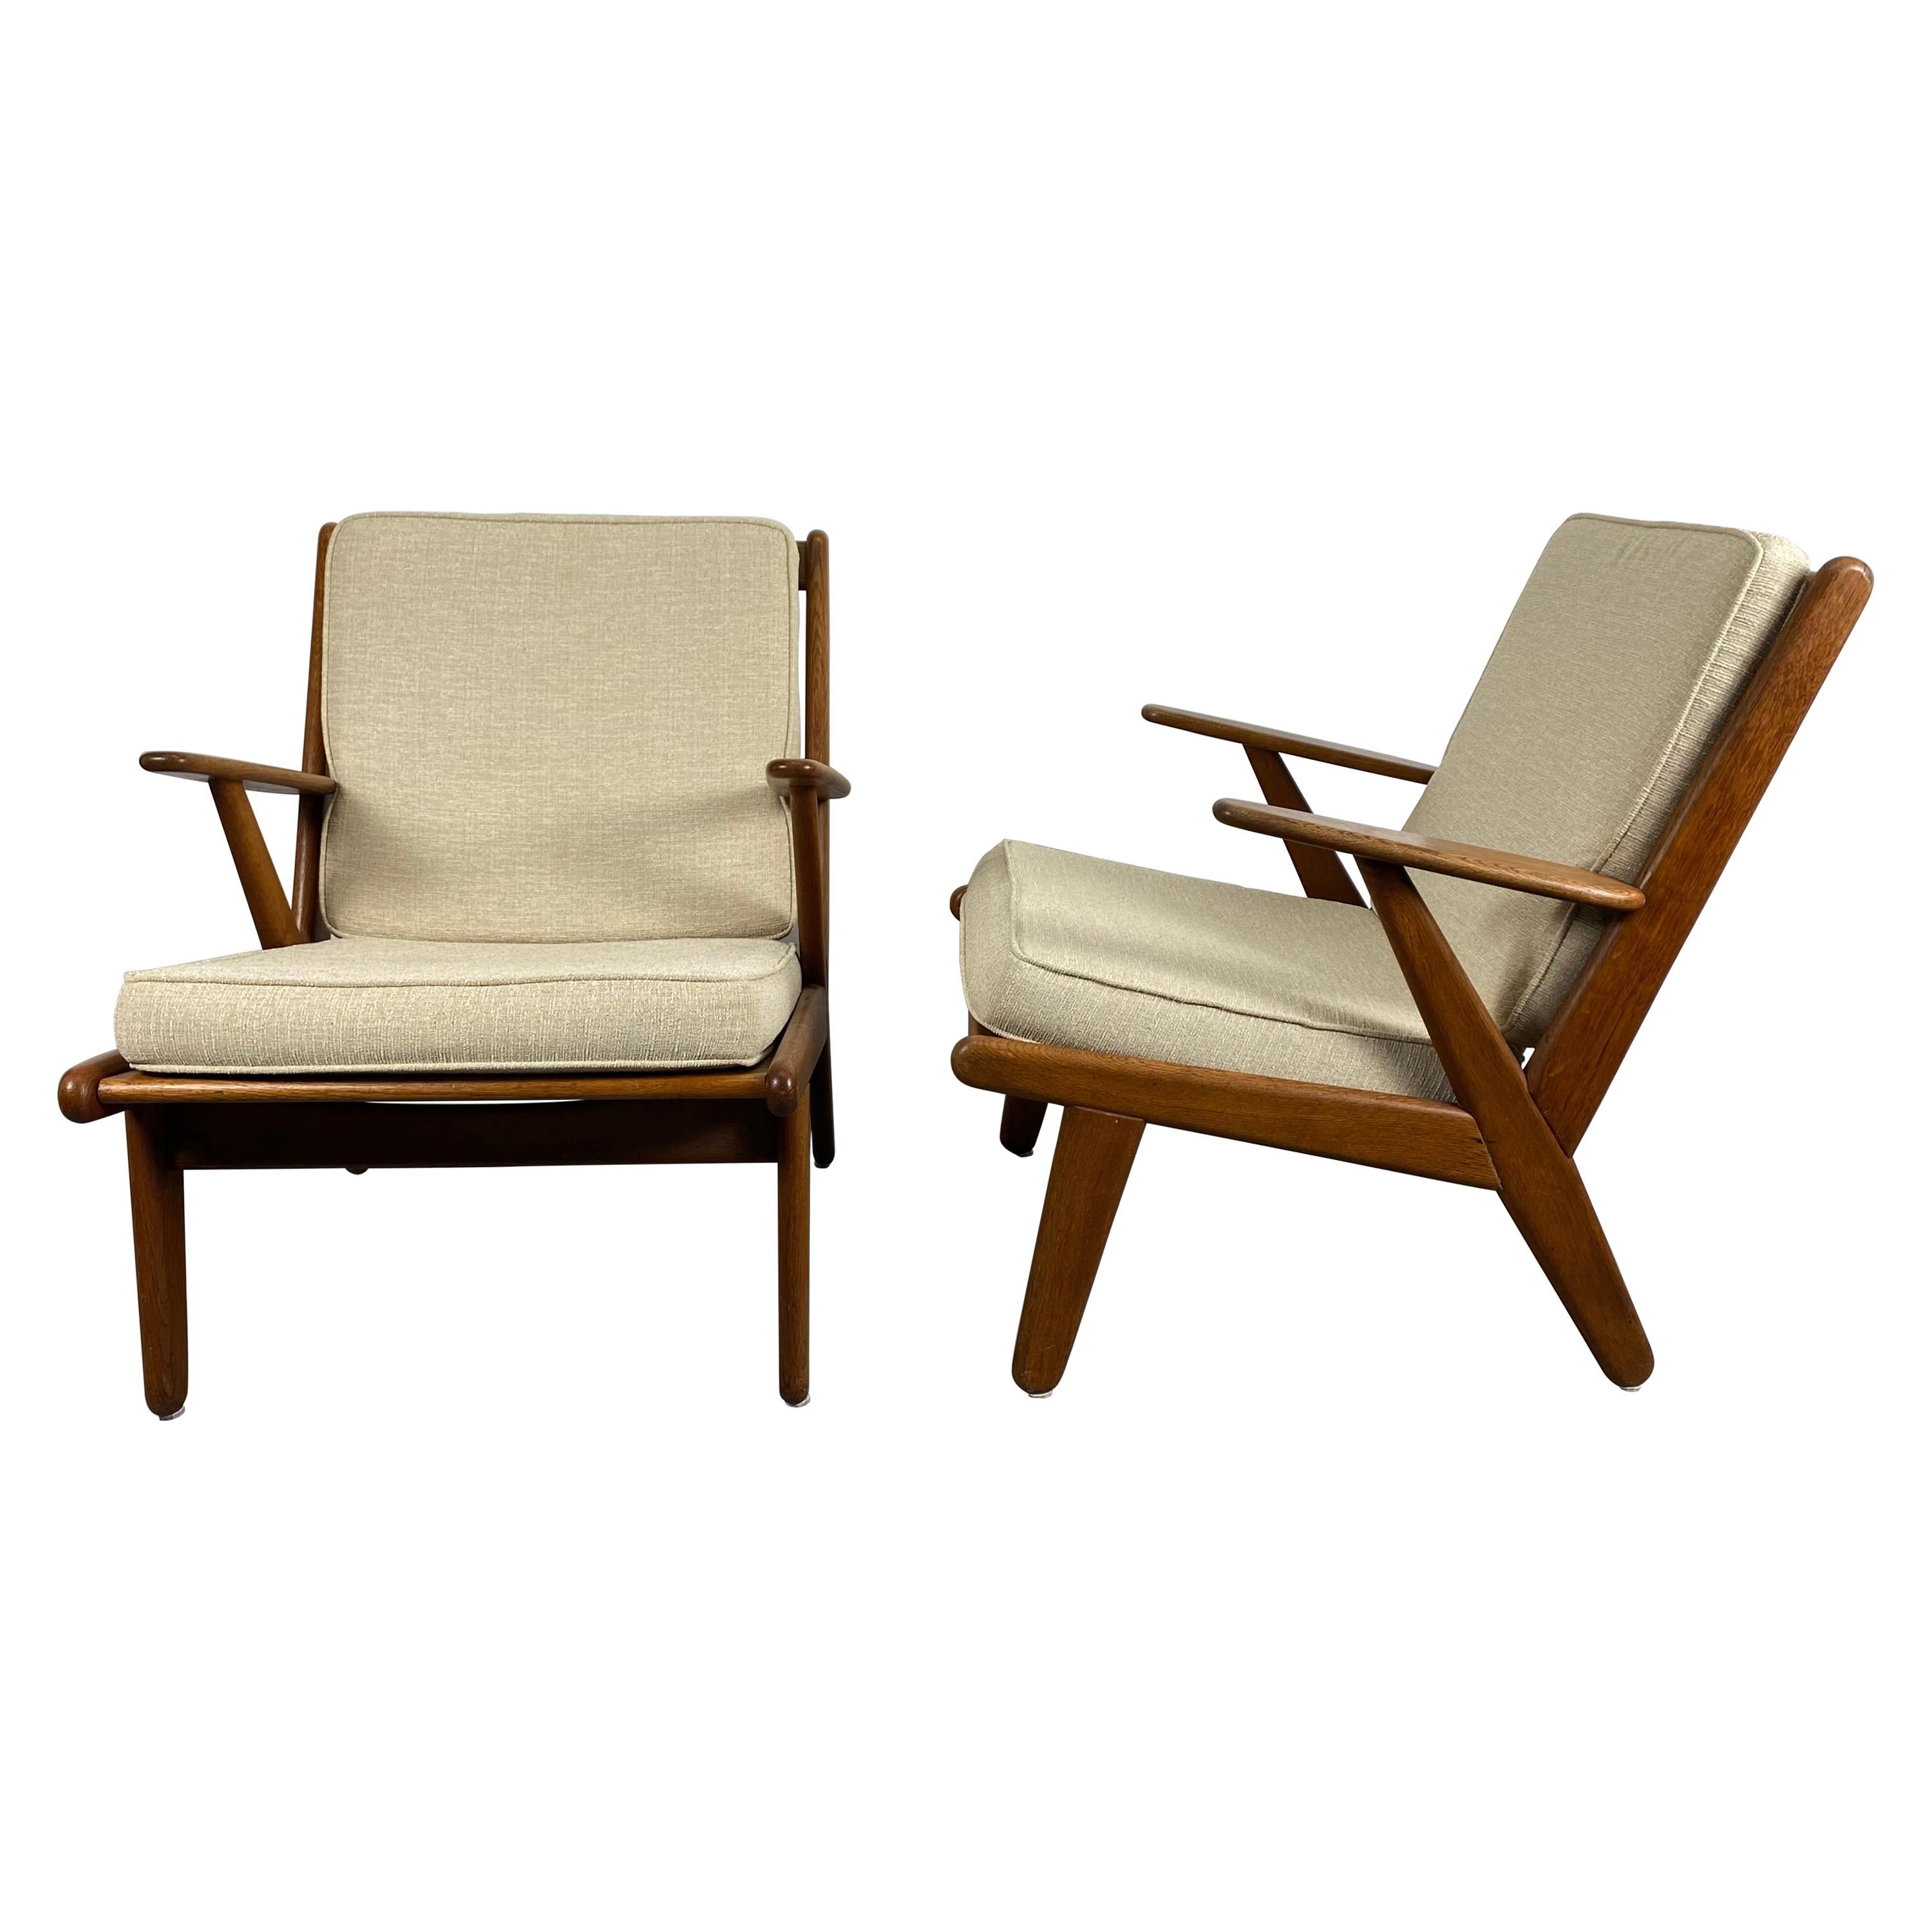 Solid Teak Danish Modernist Lounge Chairs designed by Poul Volther / Denmark